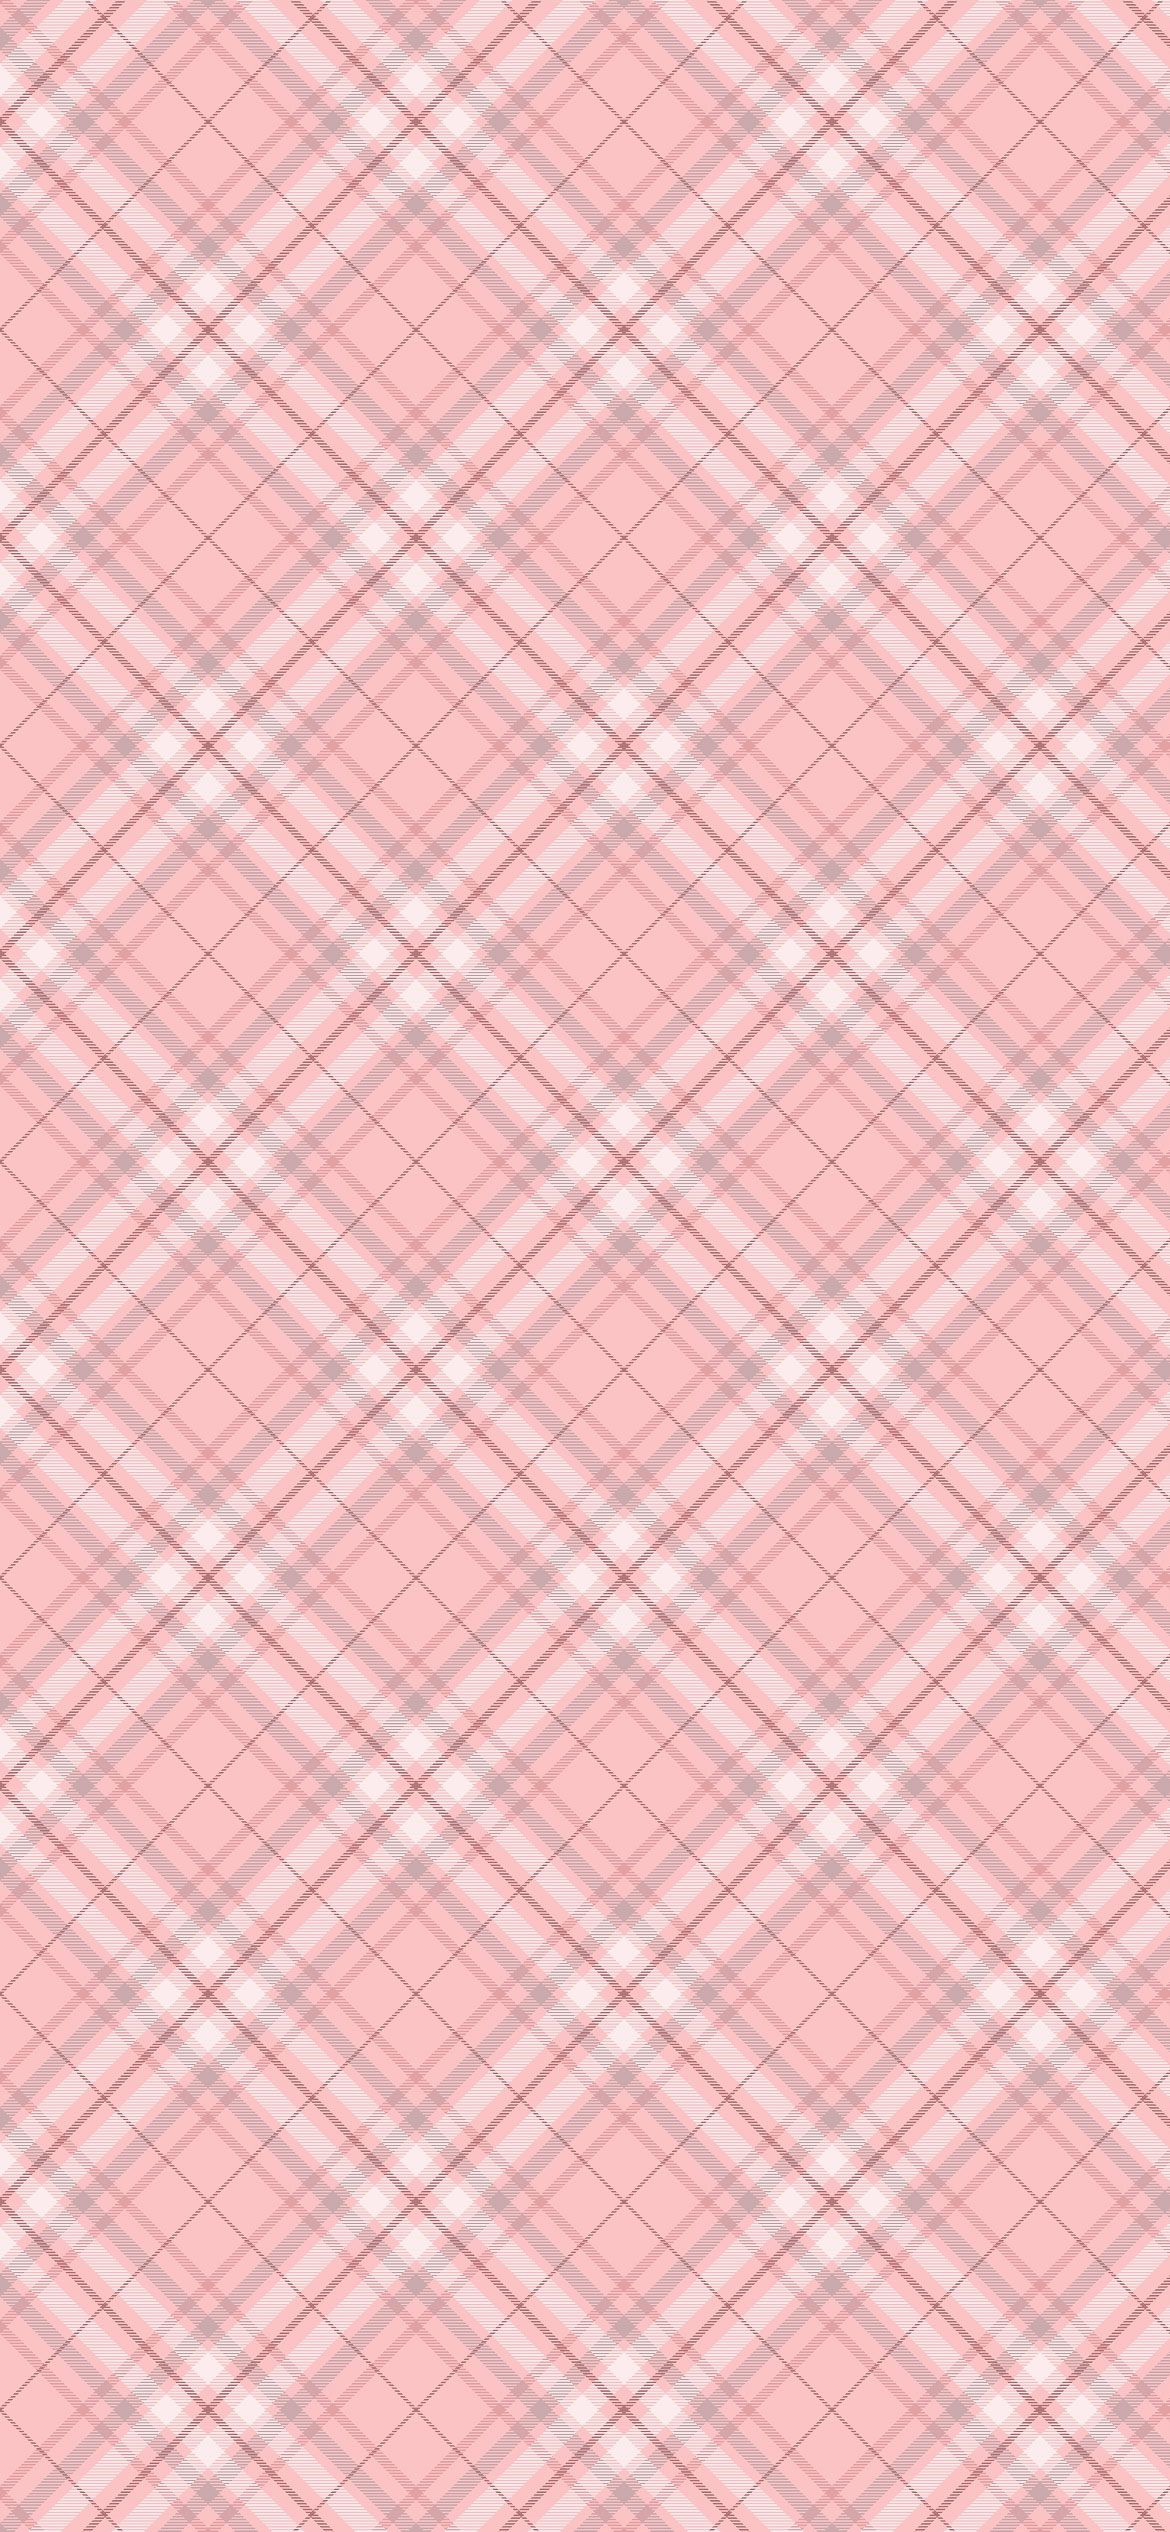 Pink Aesthetic Picture : Burberry Pink Plaid Wallpaper